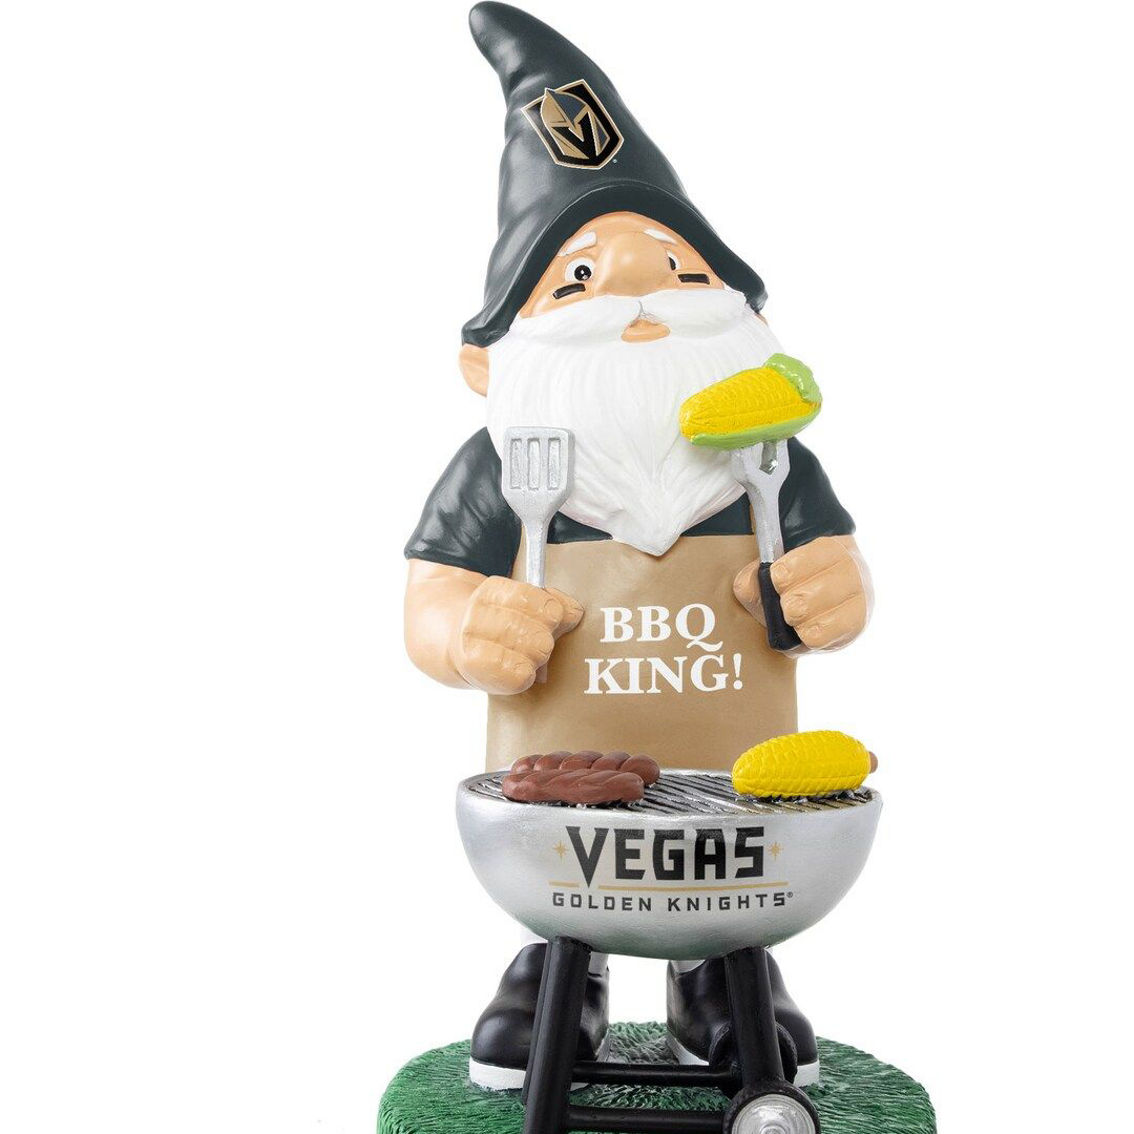 FOCO Vegas Golden Knights Grill Gnome - Image 2 of 2